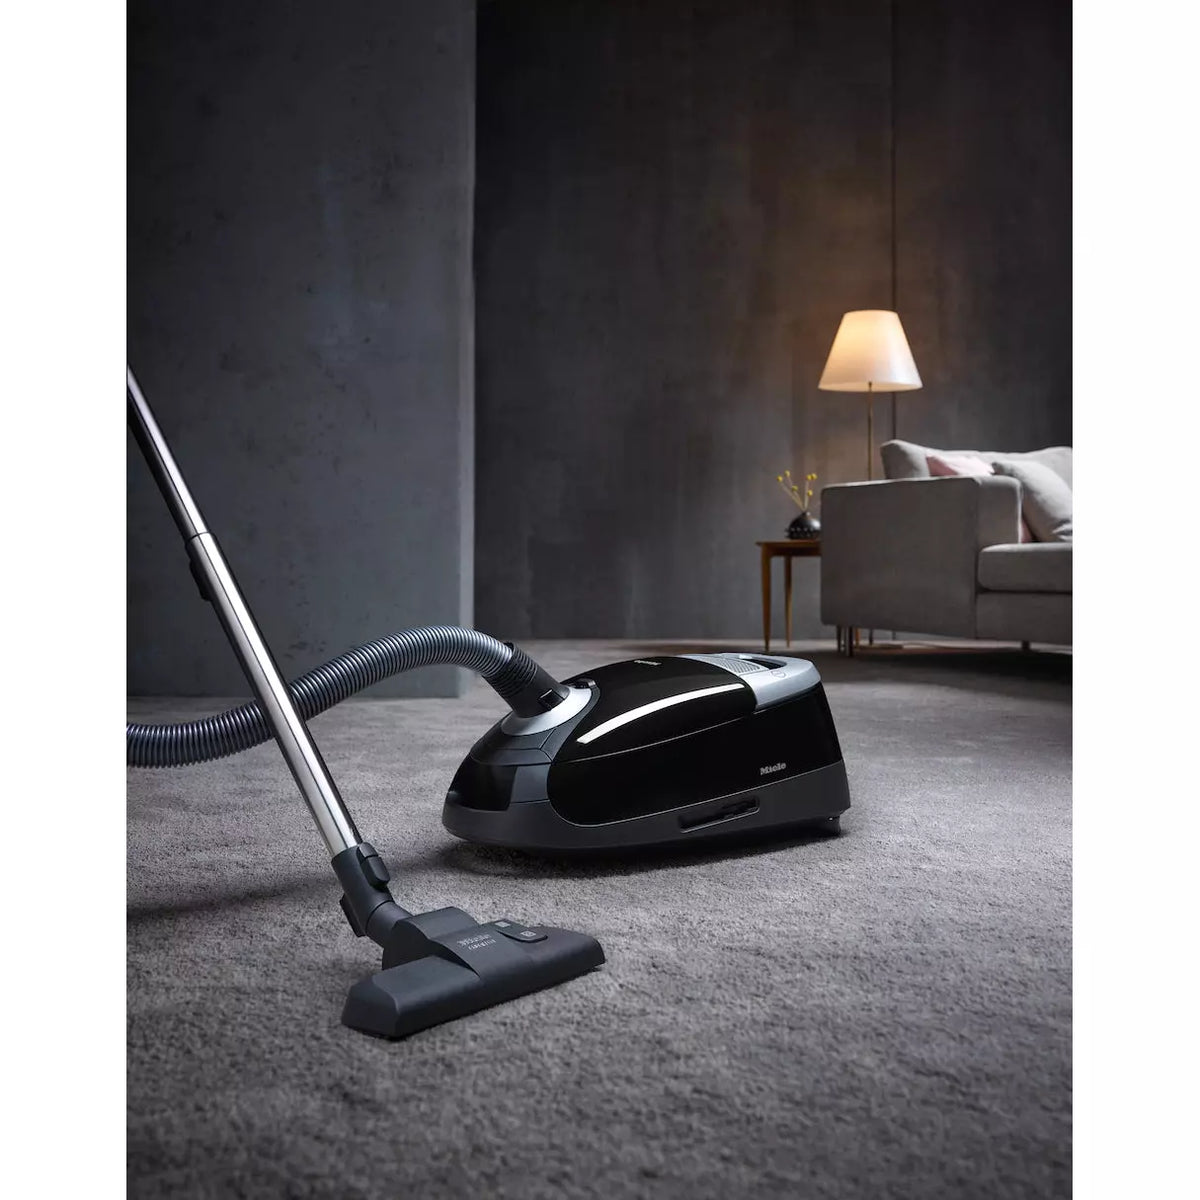 Miele Complete C2 Flex Powerline Cylinder Vacuum Cleaner - Obsidian Black | C2 BLACK from Miele - DID Electrical